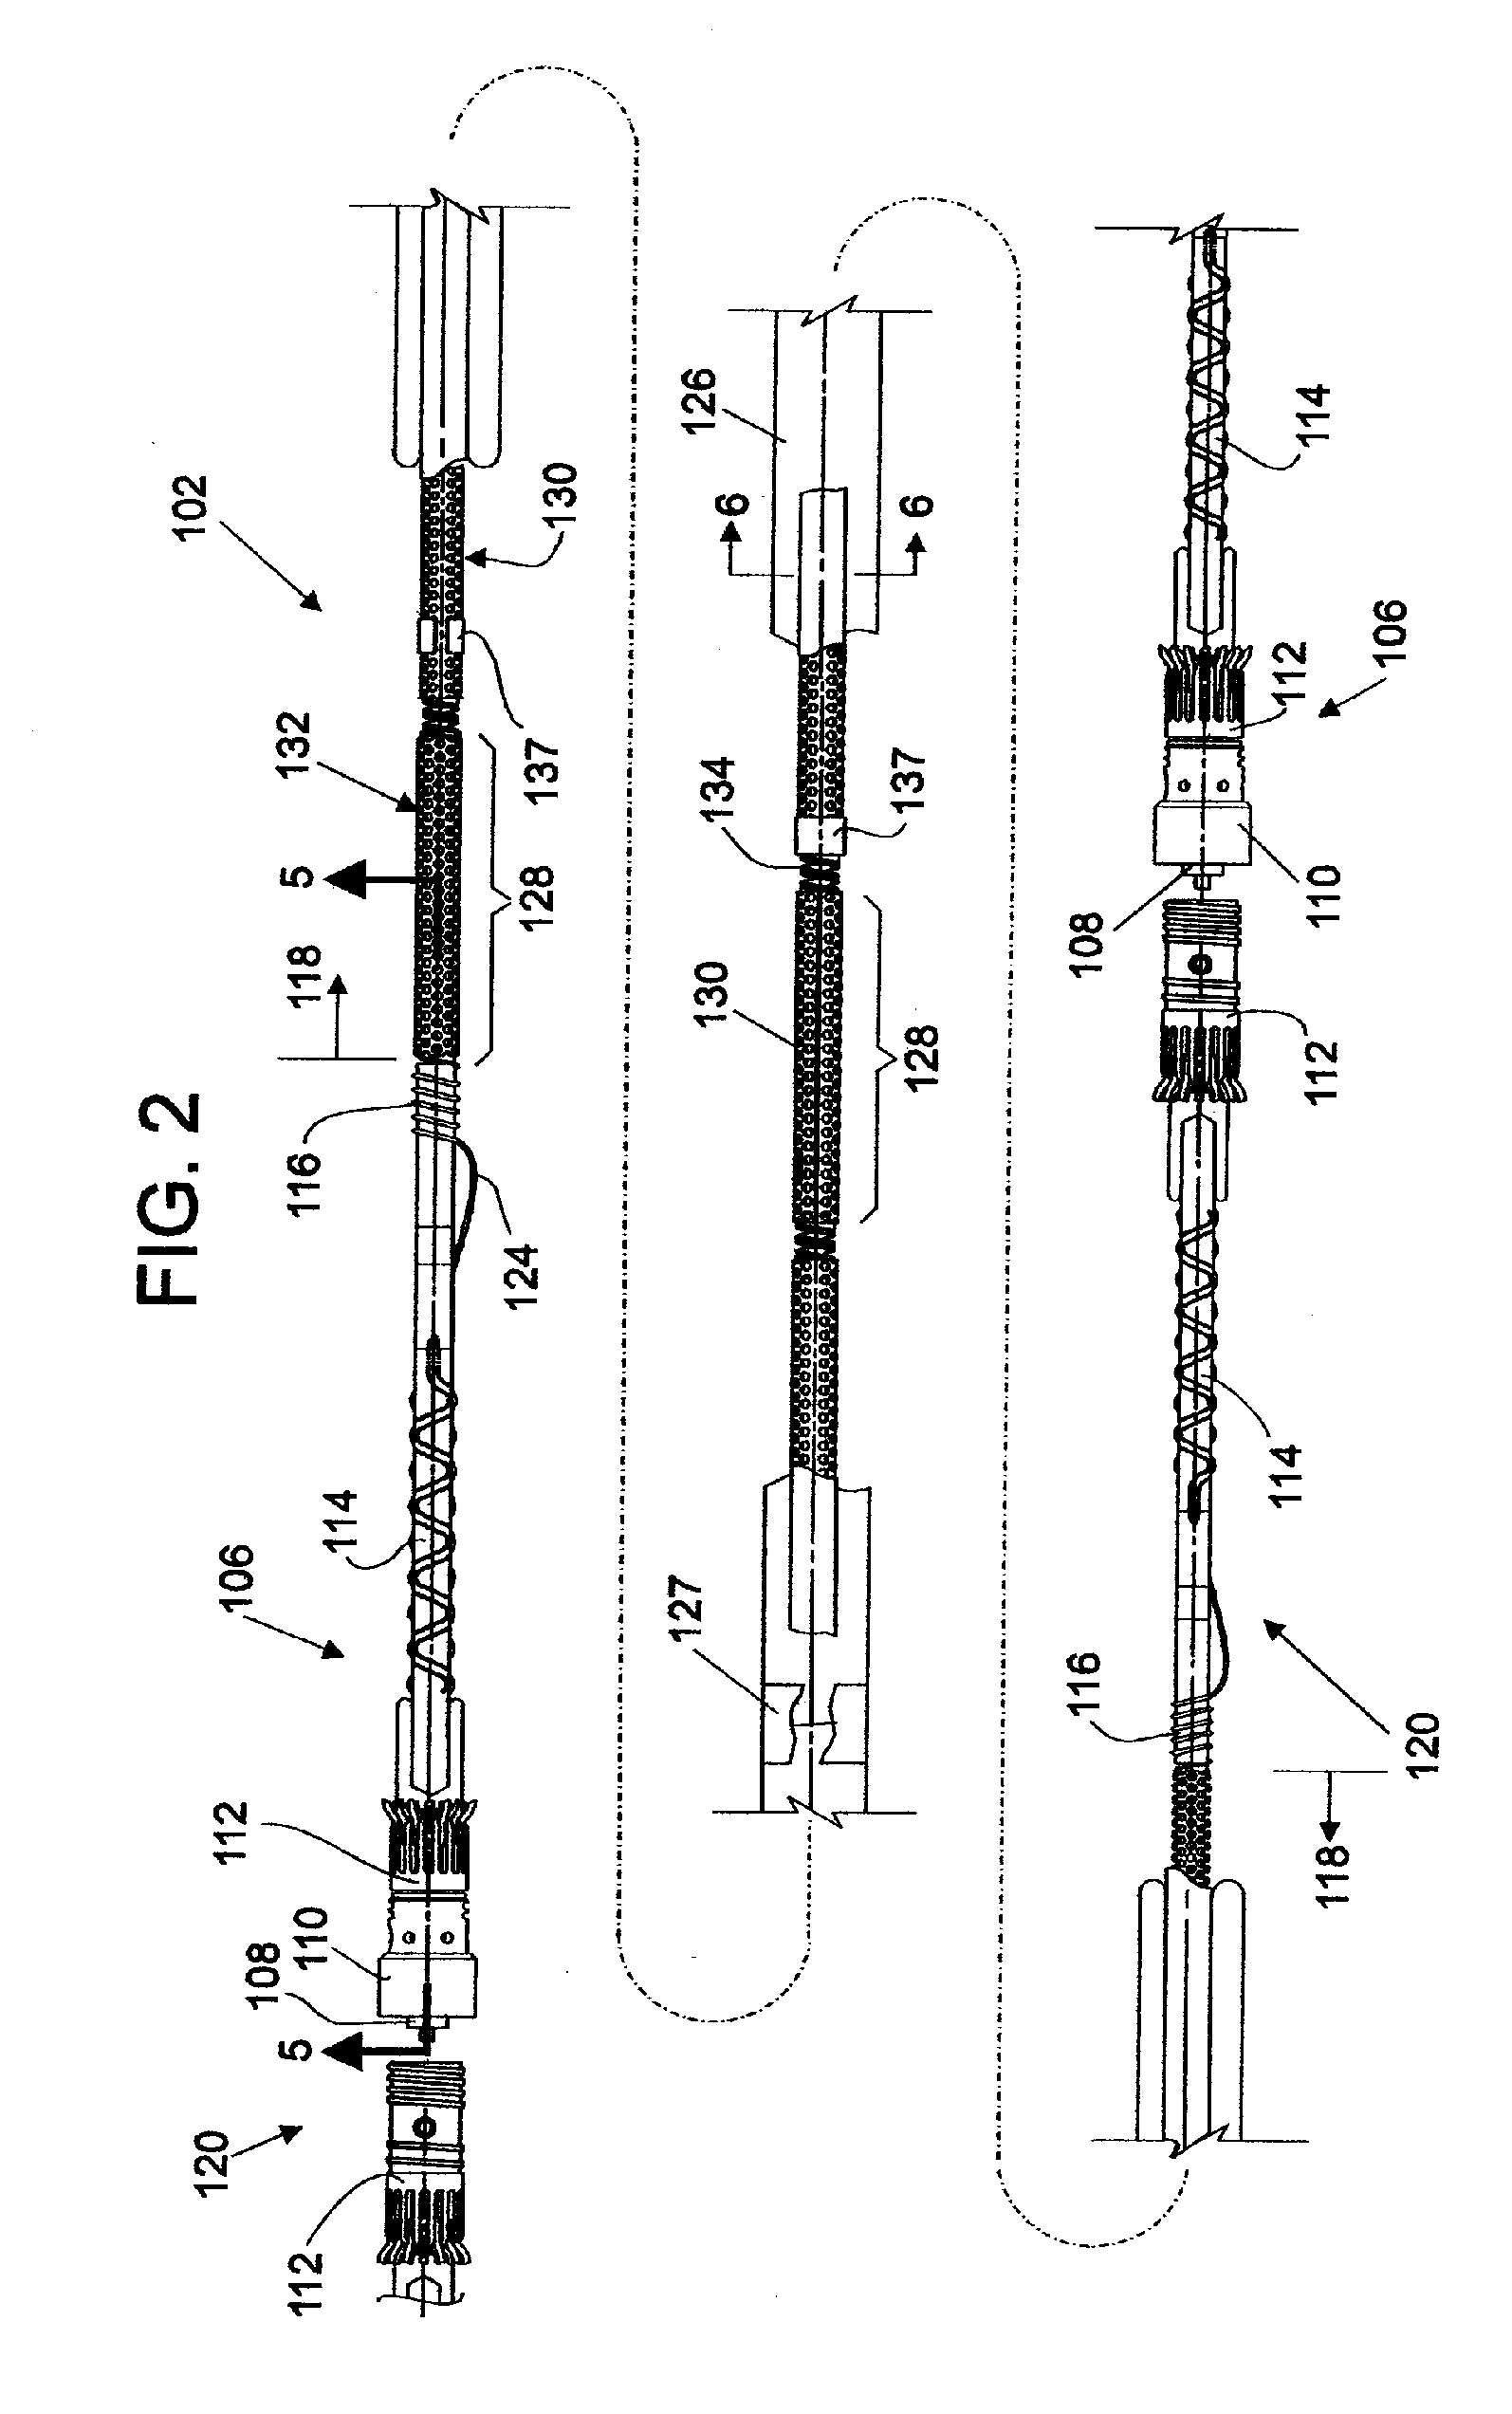 Mount for use in optical fiber hydrophone array